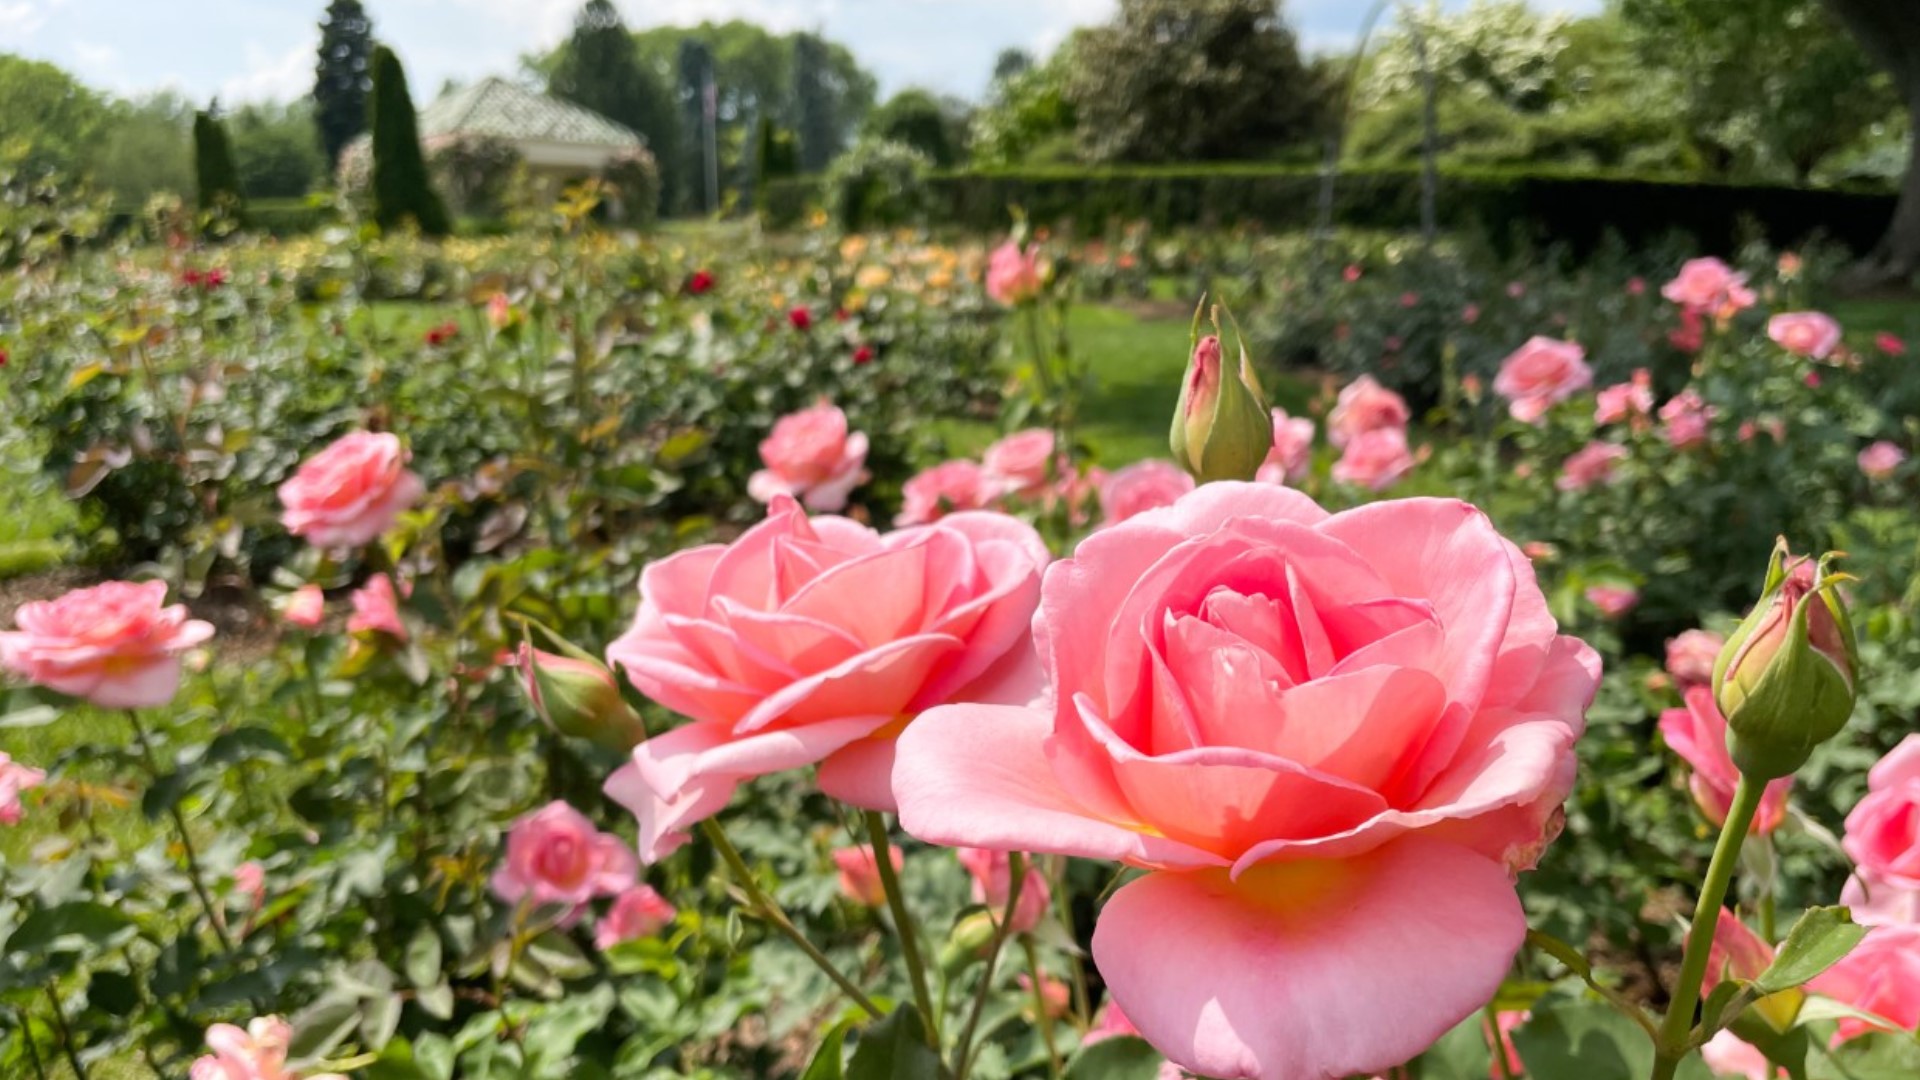 The Historic Hershey Rose Garden at Hershey Gardens is now covered with 3,000 roses representing 115 varieties.